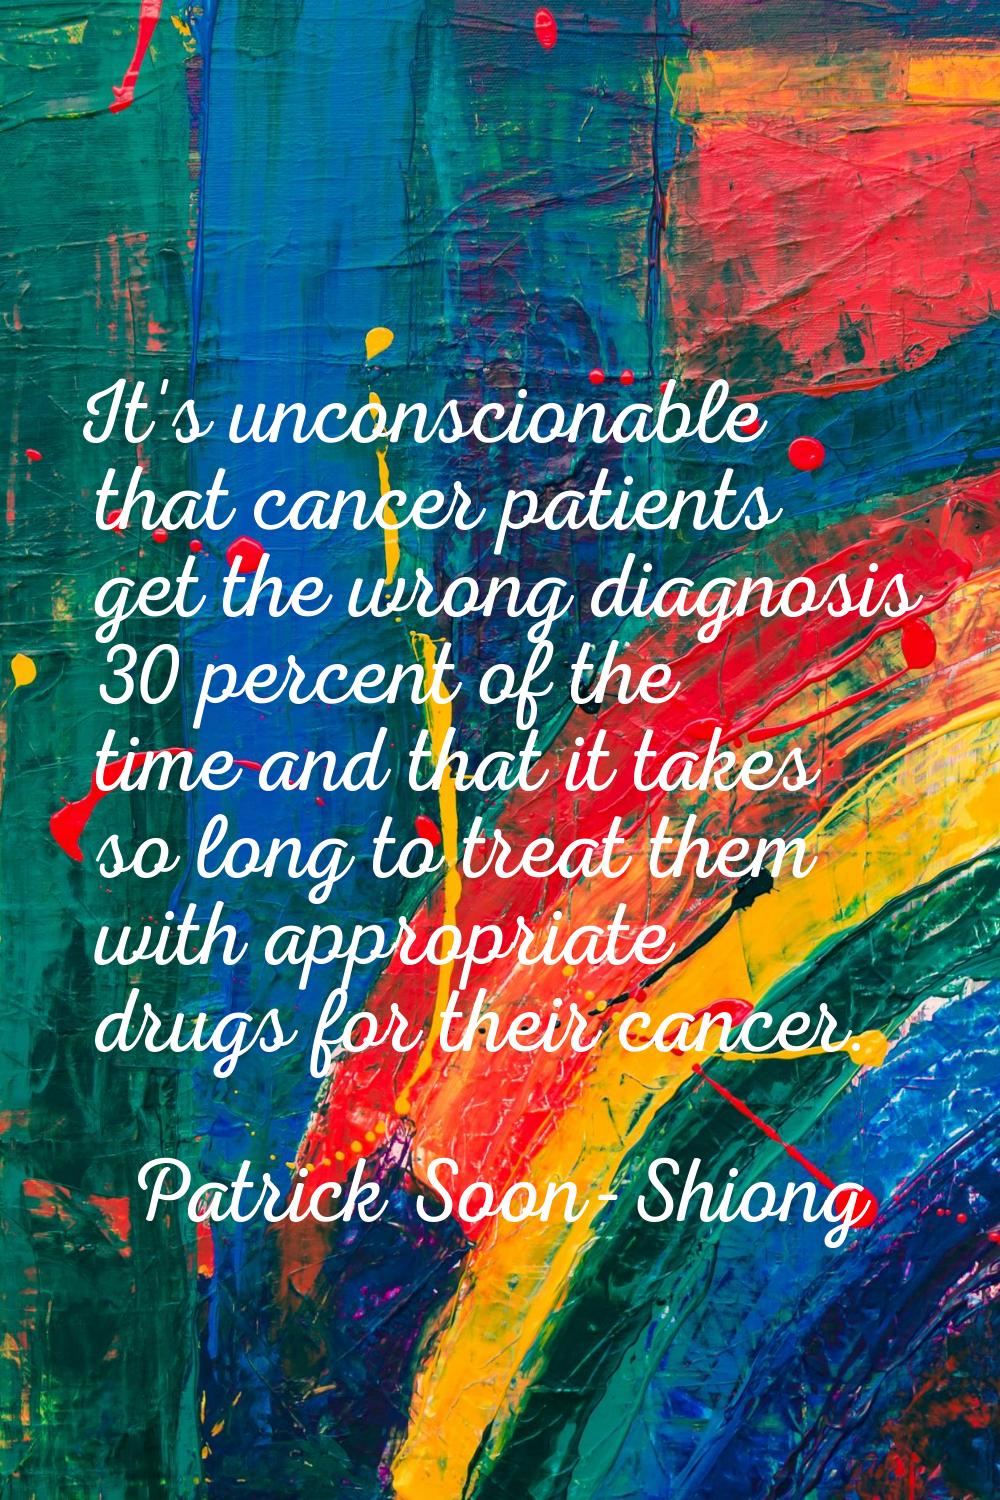 It's unconscionable that cancer patients get the wrong diagnosis 30 percent of the time and that it